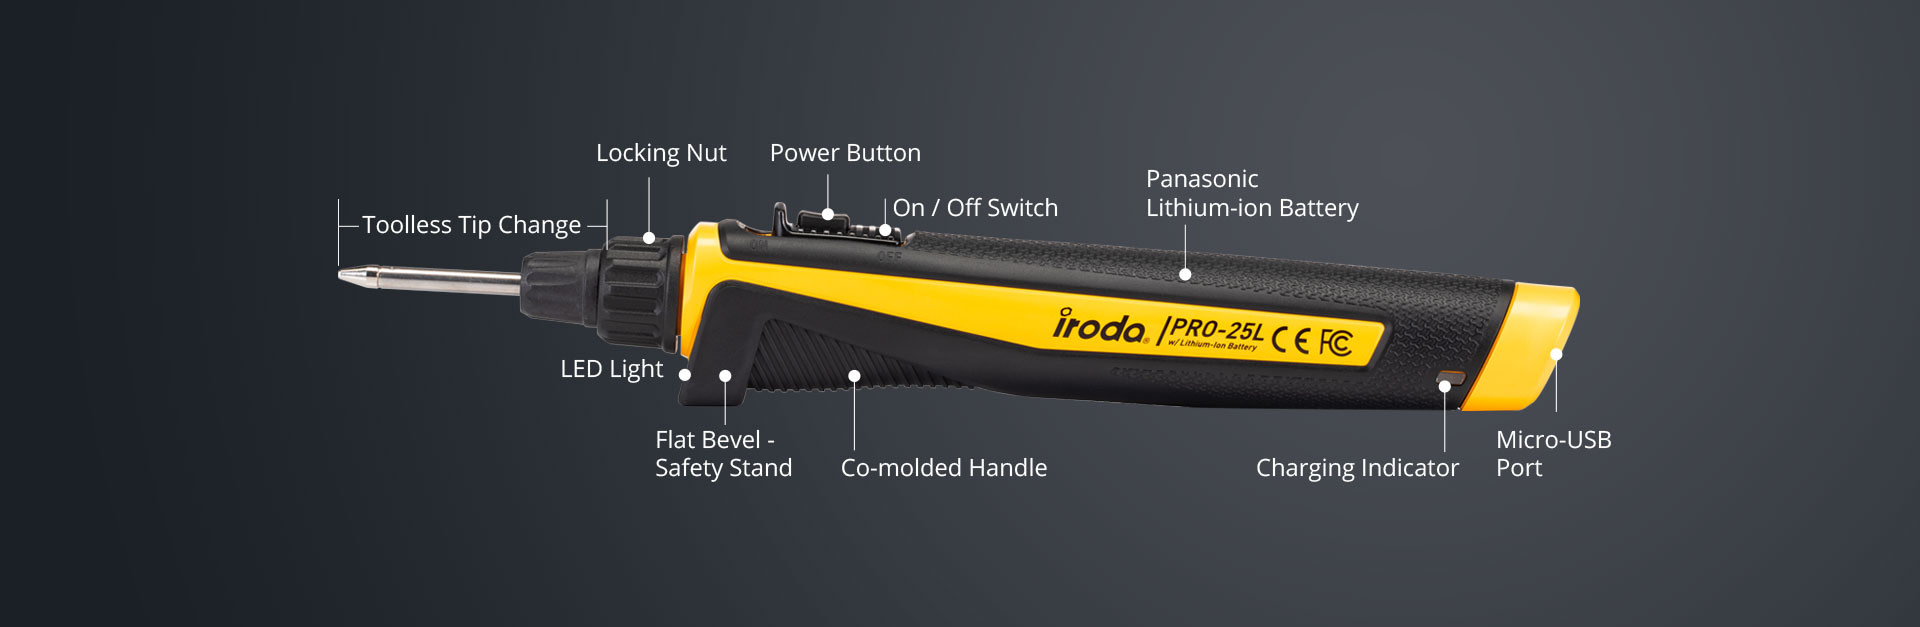 Horizontal Description of PRO-25L USB Battery Rechargeable Soldering Iron from Pro-Iroda